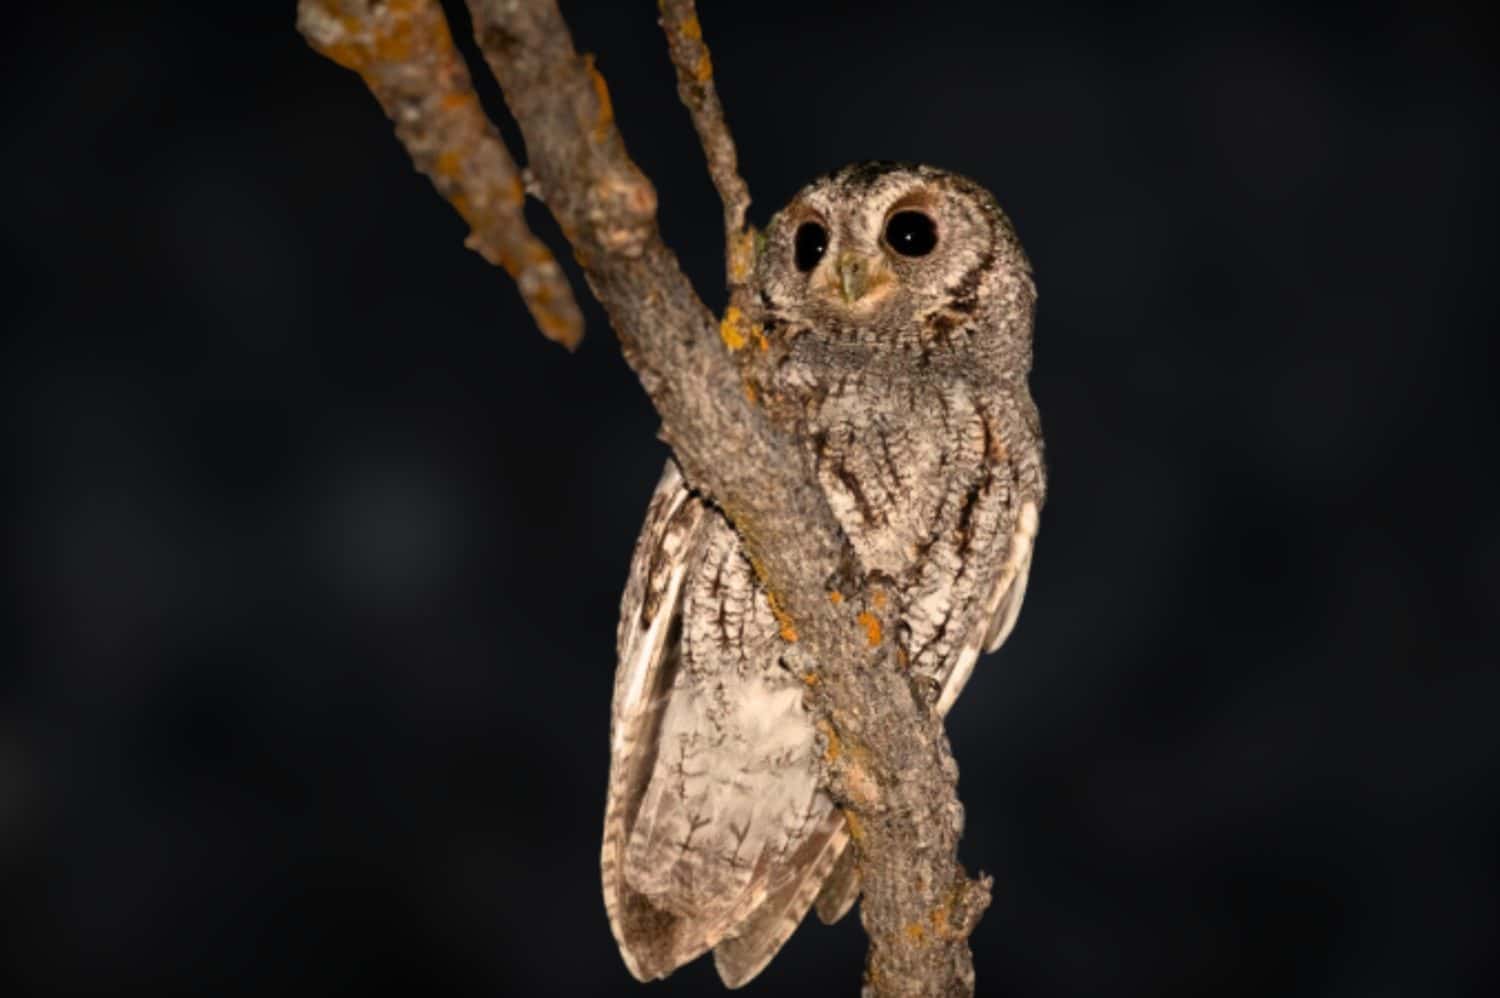 The flammulated owl is a small, nocturnal owl approximately 15 cm (6 in) long with a 36 cm (14 in) wingspan. With such large wings for a small body, they can fly rapidly from tree to tree.